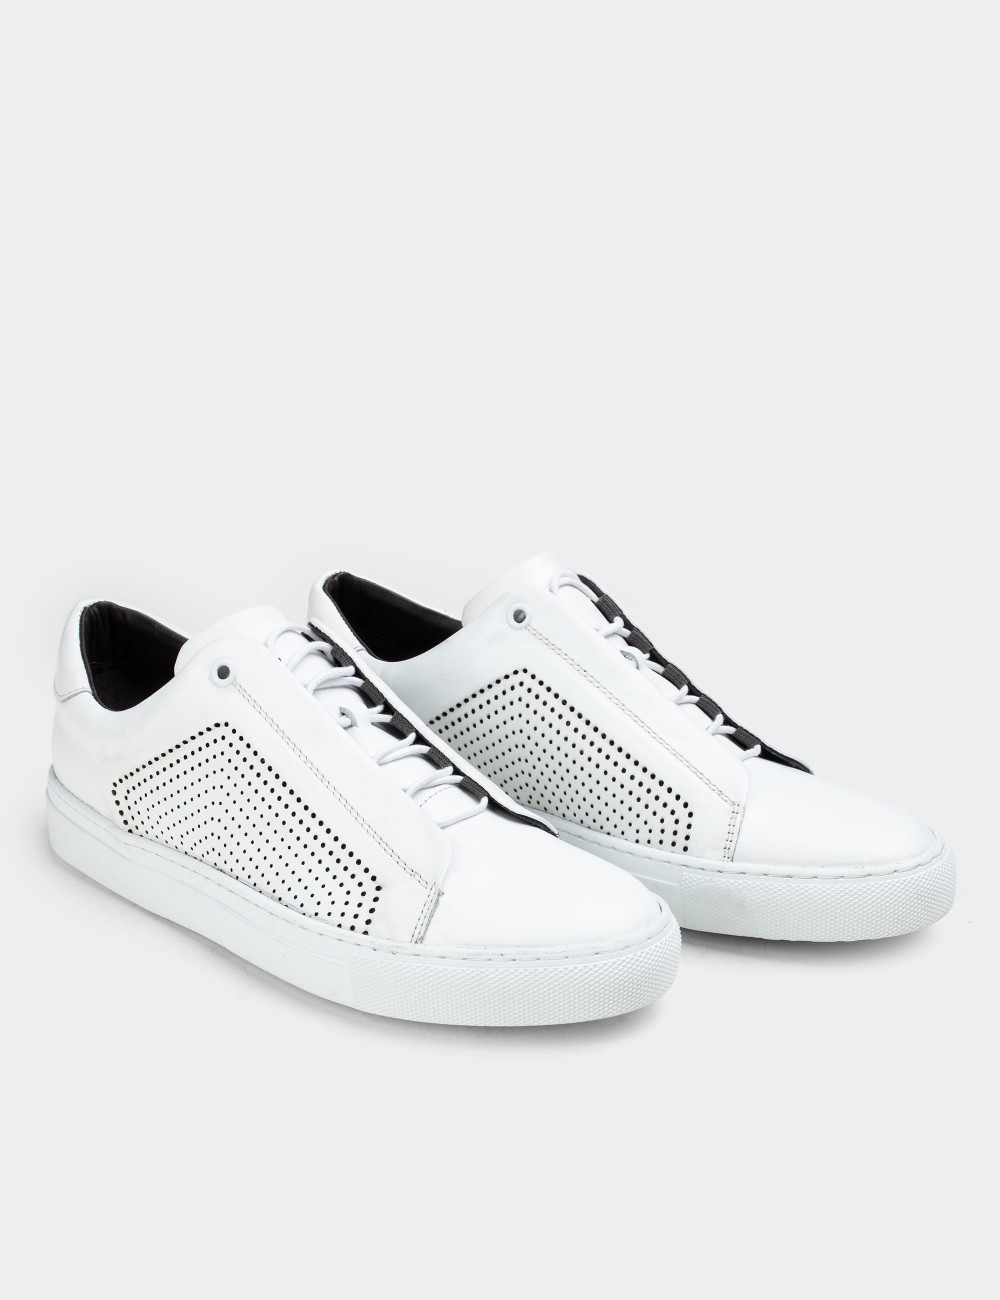 White  Leather Sneakers - 01834MBYZC01